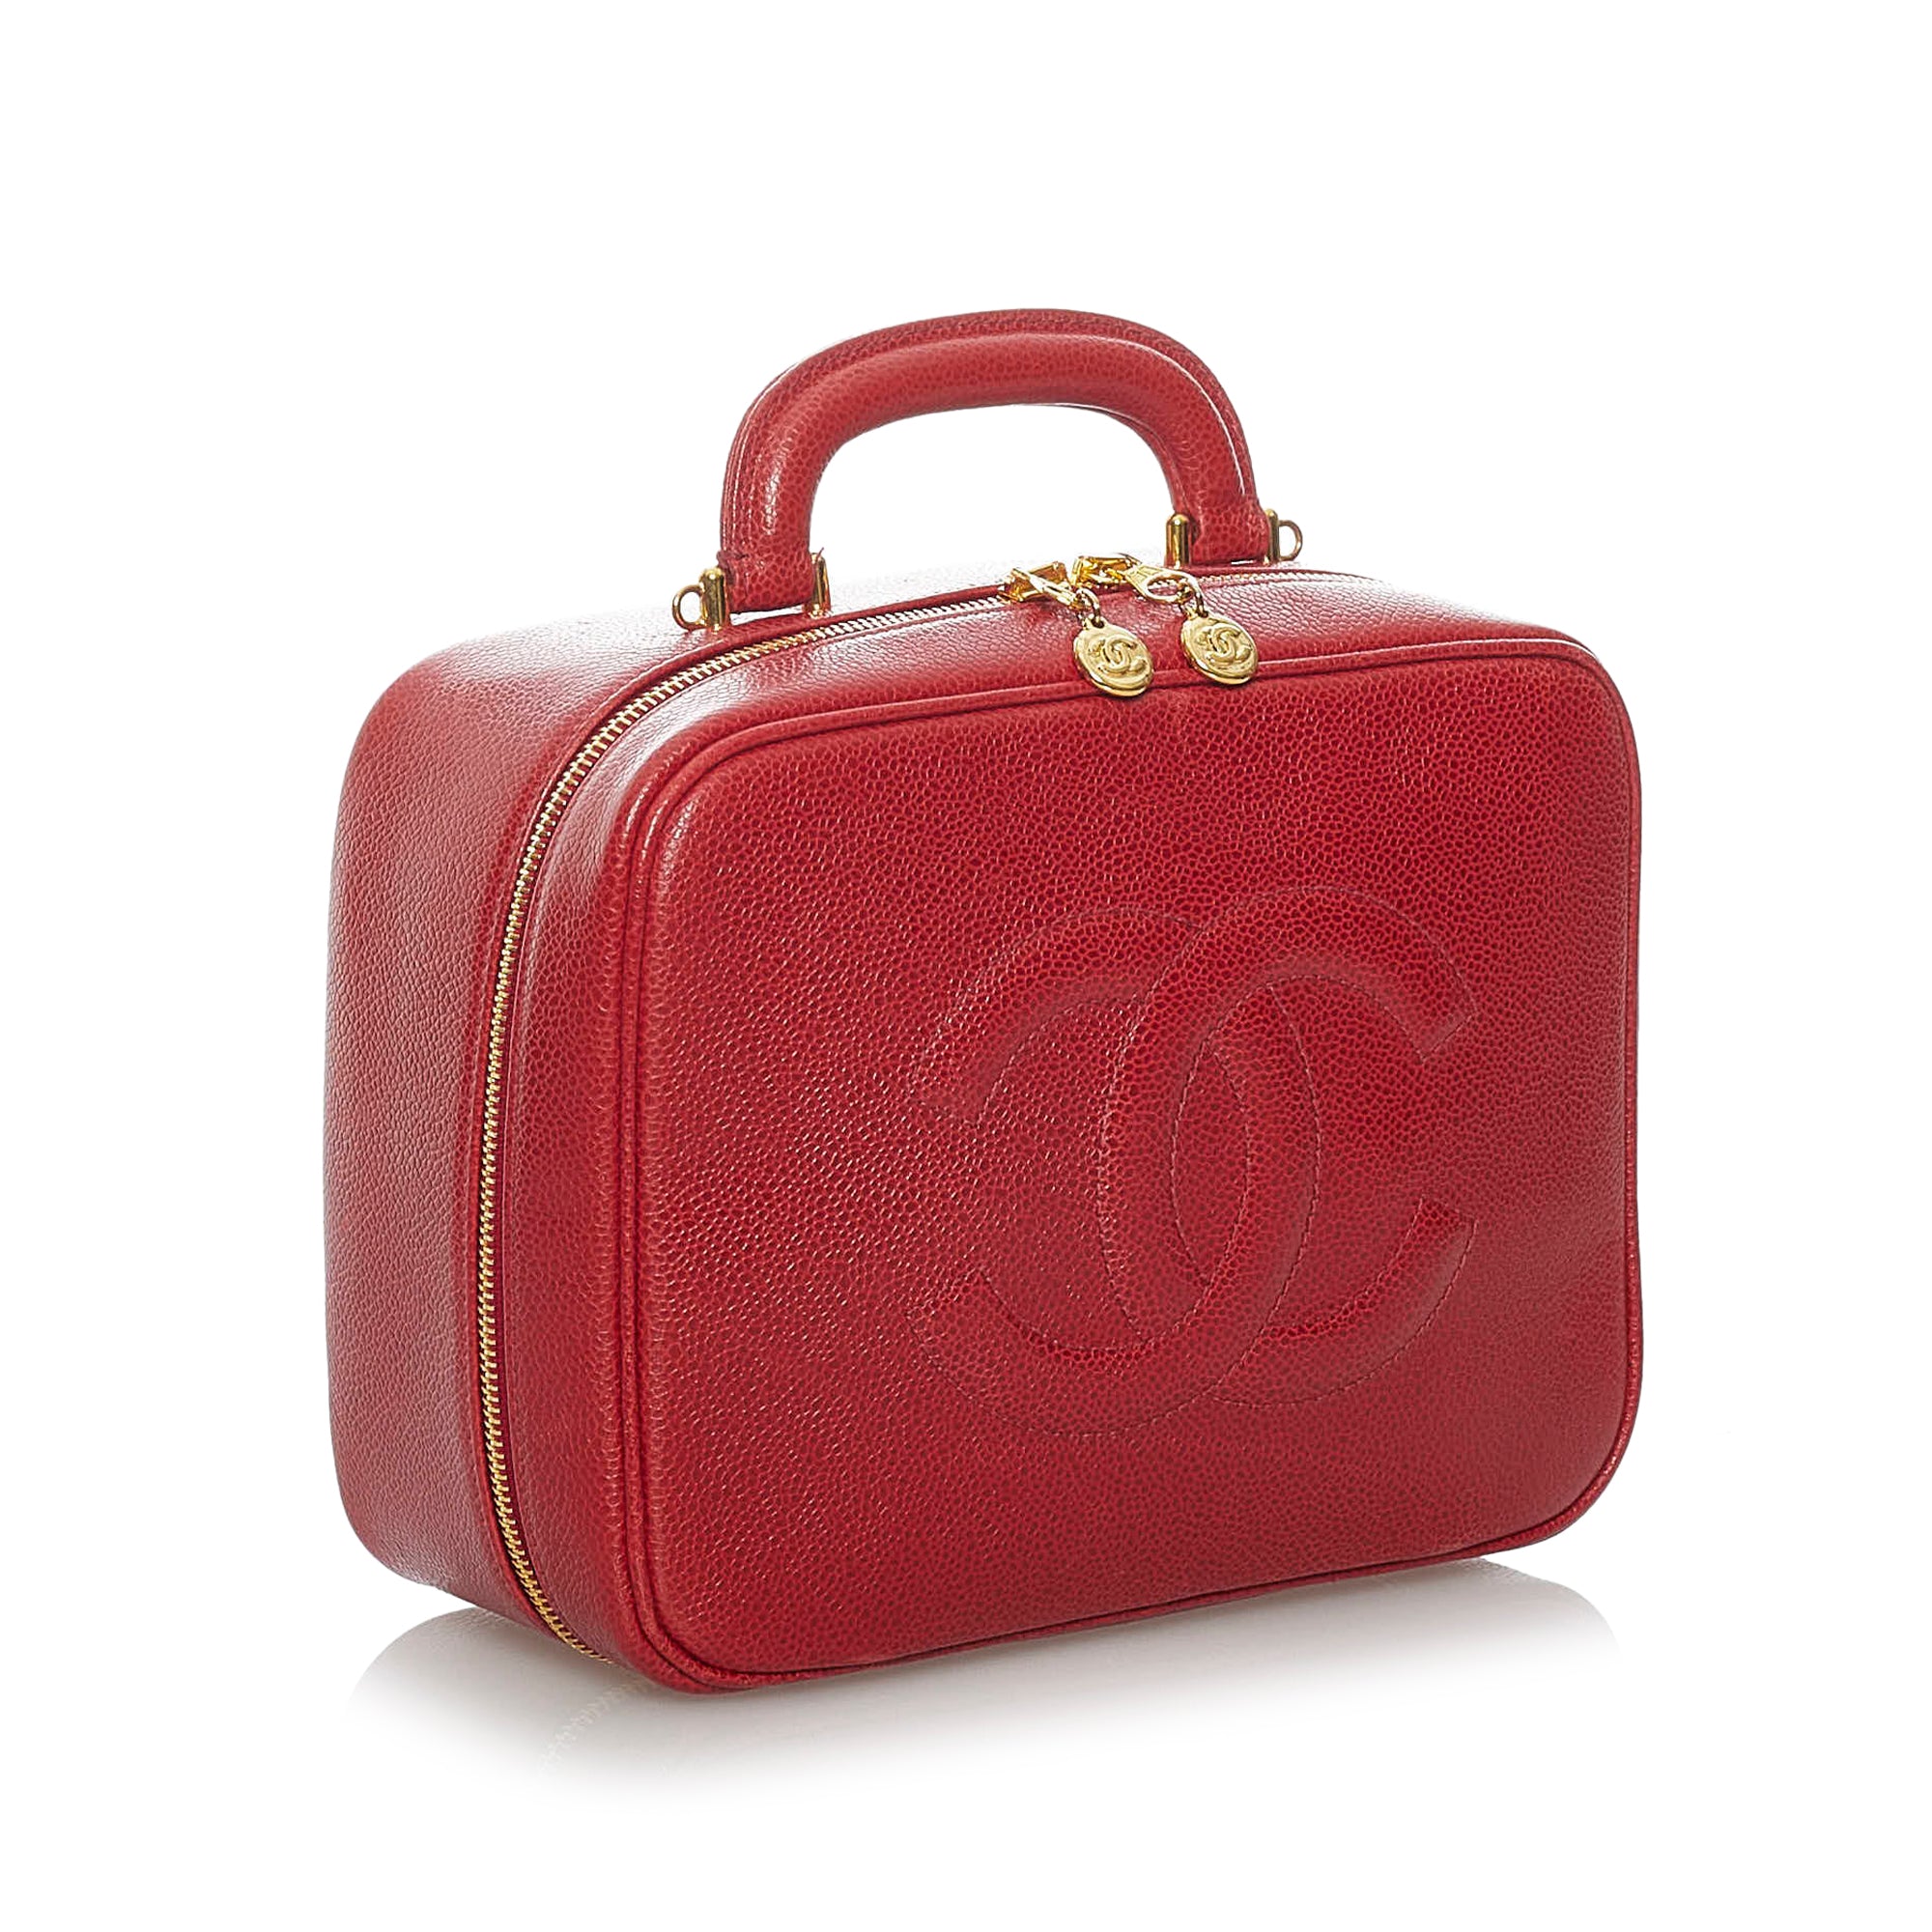 Chanel Small Filigree Vanity Case Red - ShopStyle Satchels & Top